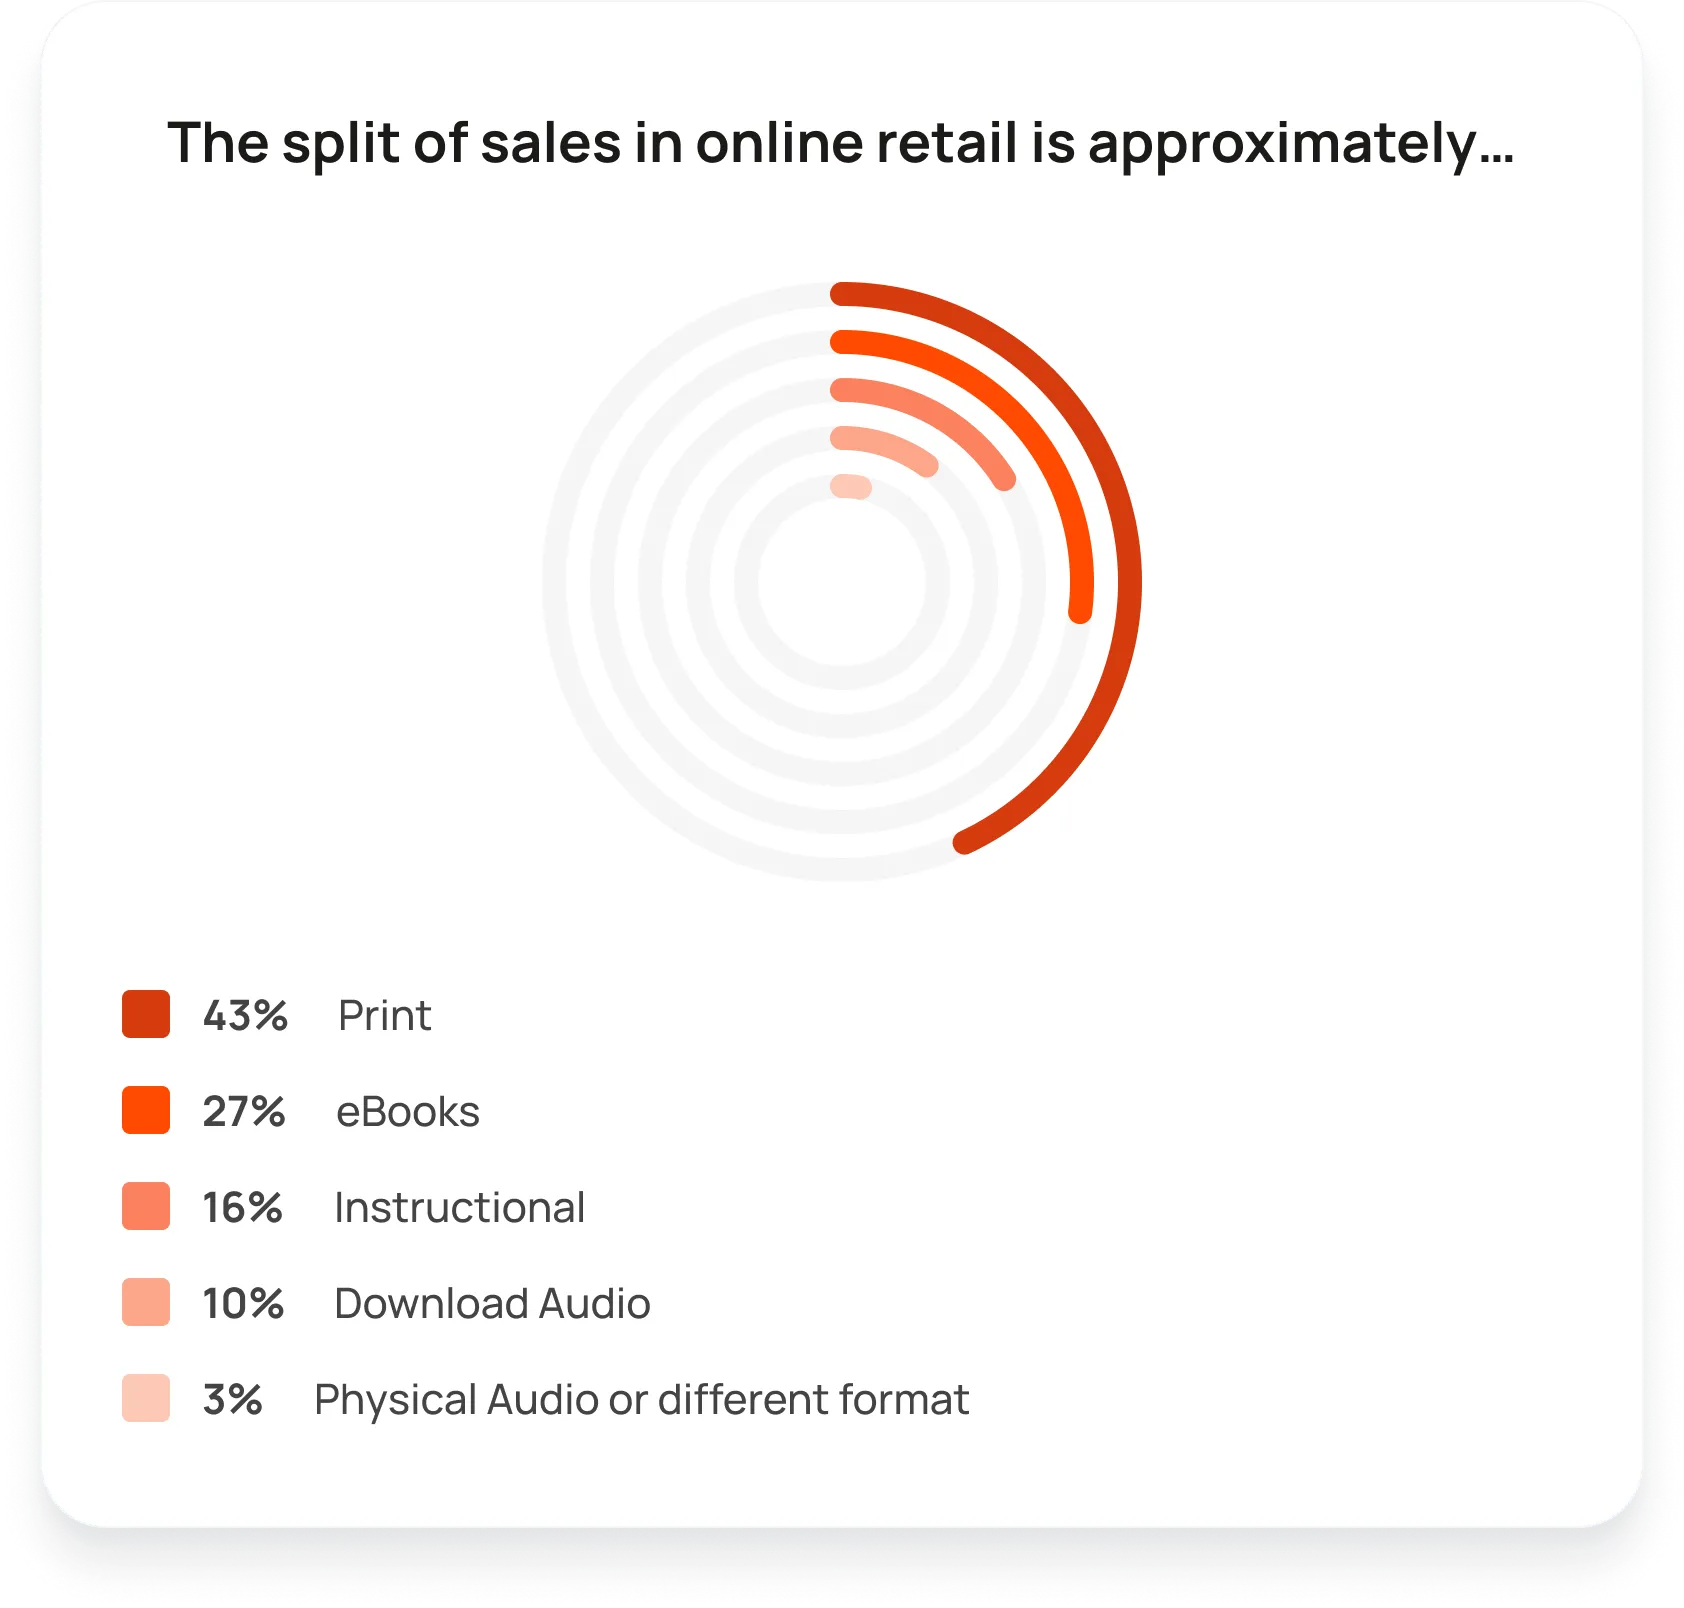 The split of sales in online retail is approximately 43% - Print 27% - eBooks 16% - Instructional 10% - Download Audio 3% - Physical Audio or different format